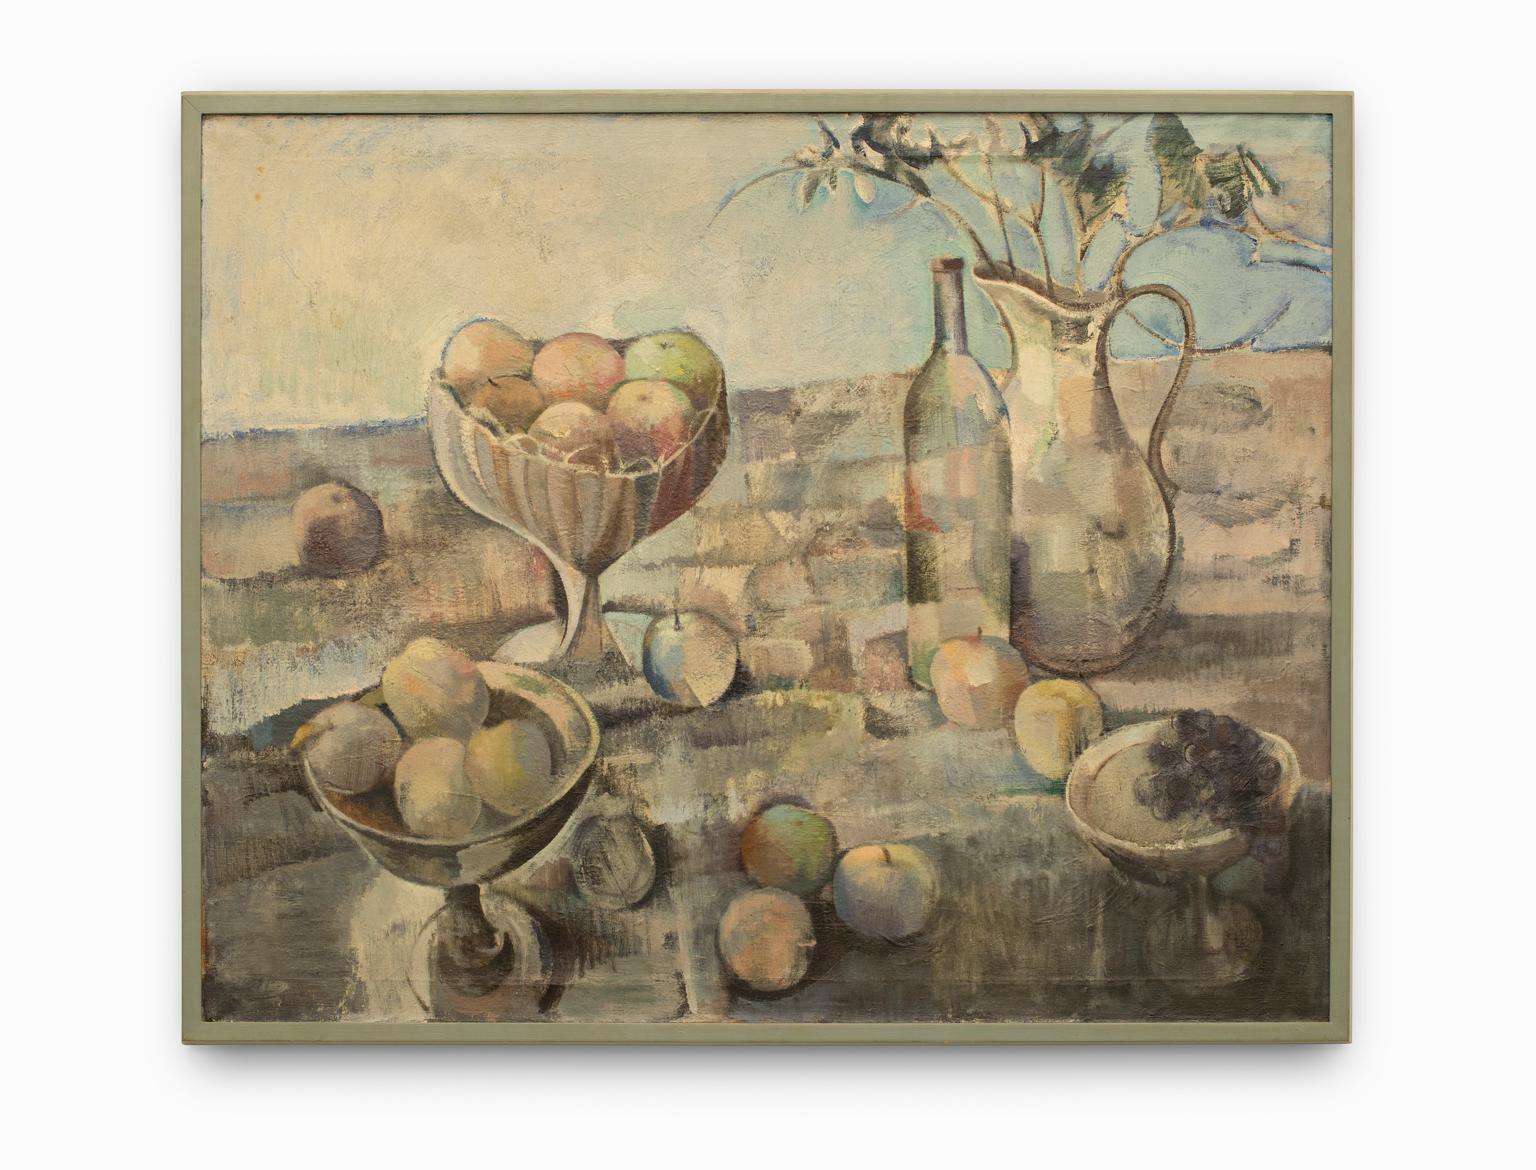 Zubel Kachadoorian Still-Life Painting - "Still Life in Landscape" Oil on Canvas, Pastel Colors, Fruit & Containers